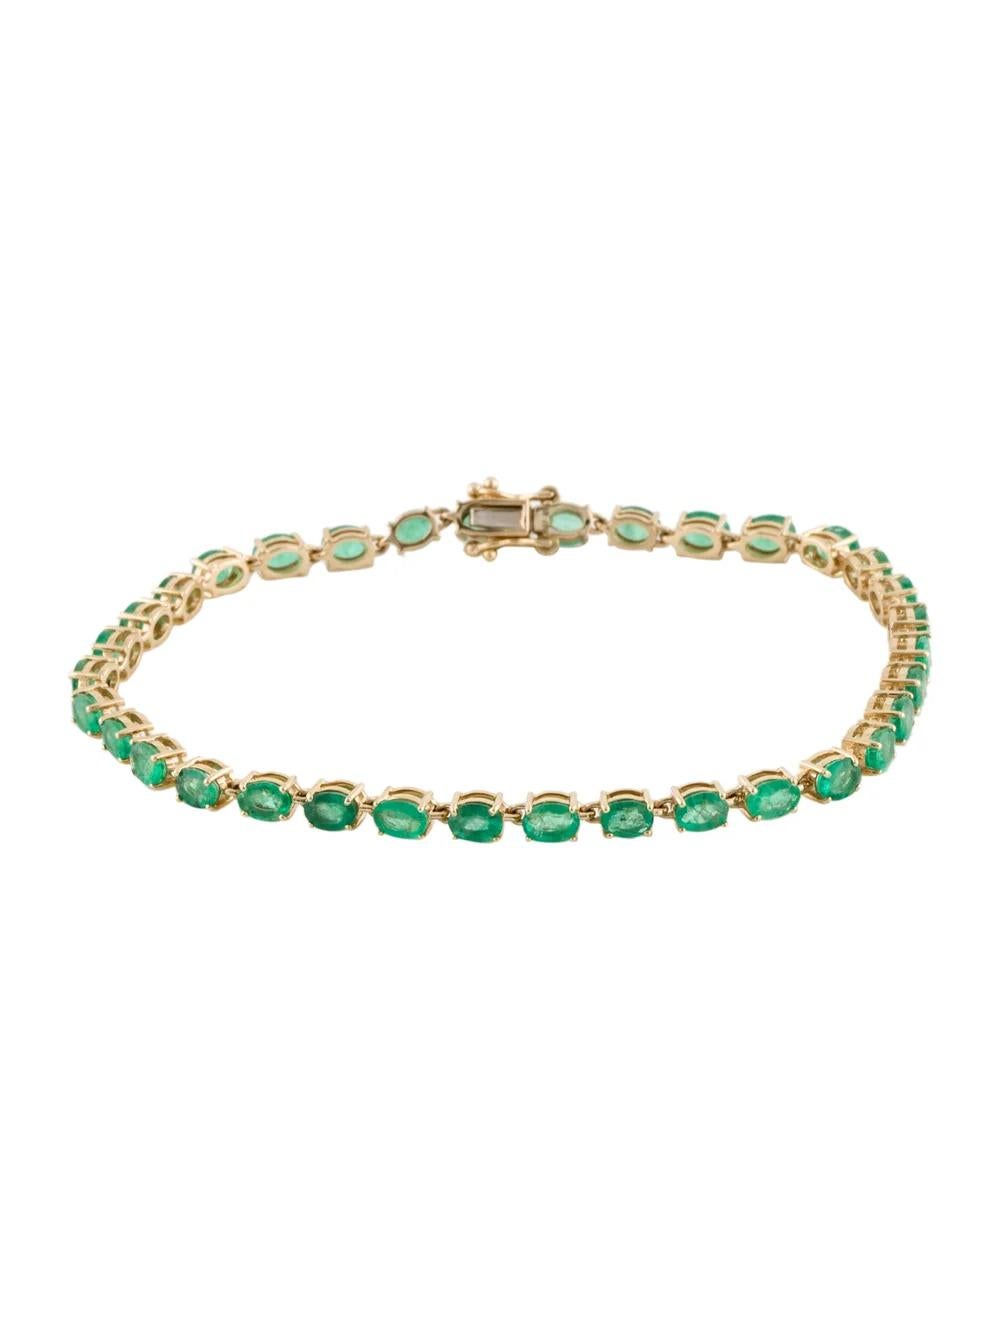 Introducing a captivating 14K Yellow Gold Bracelet featuring a remarkable 4.42 Carat Faceted Oval Emerald, exuding sophistication and timeless elegance.

Specifications:

* Metal Type: 14K Yellow Gold
* Gemstone:
* Emerald
* Carat Weight: 4.42
*